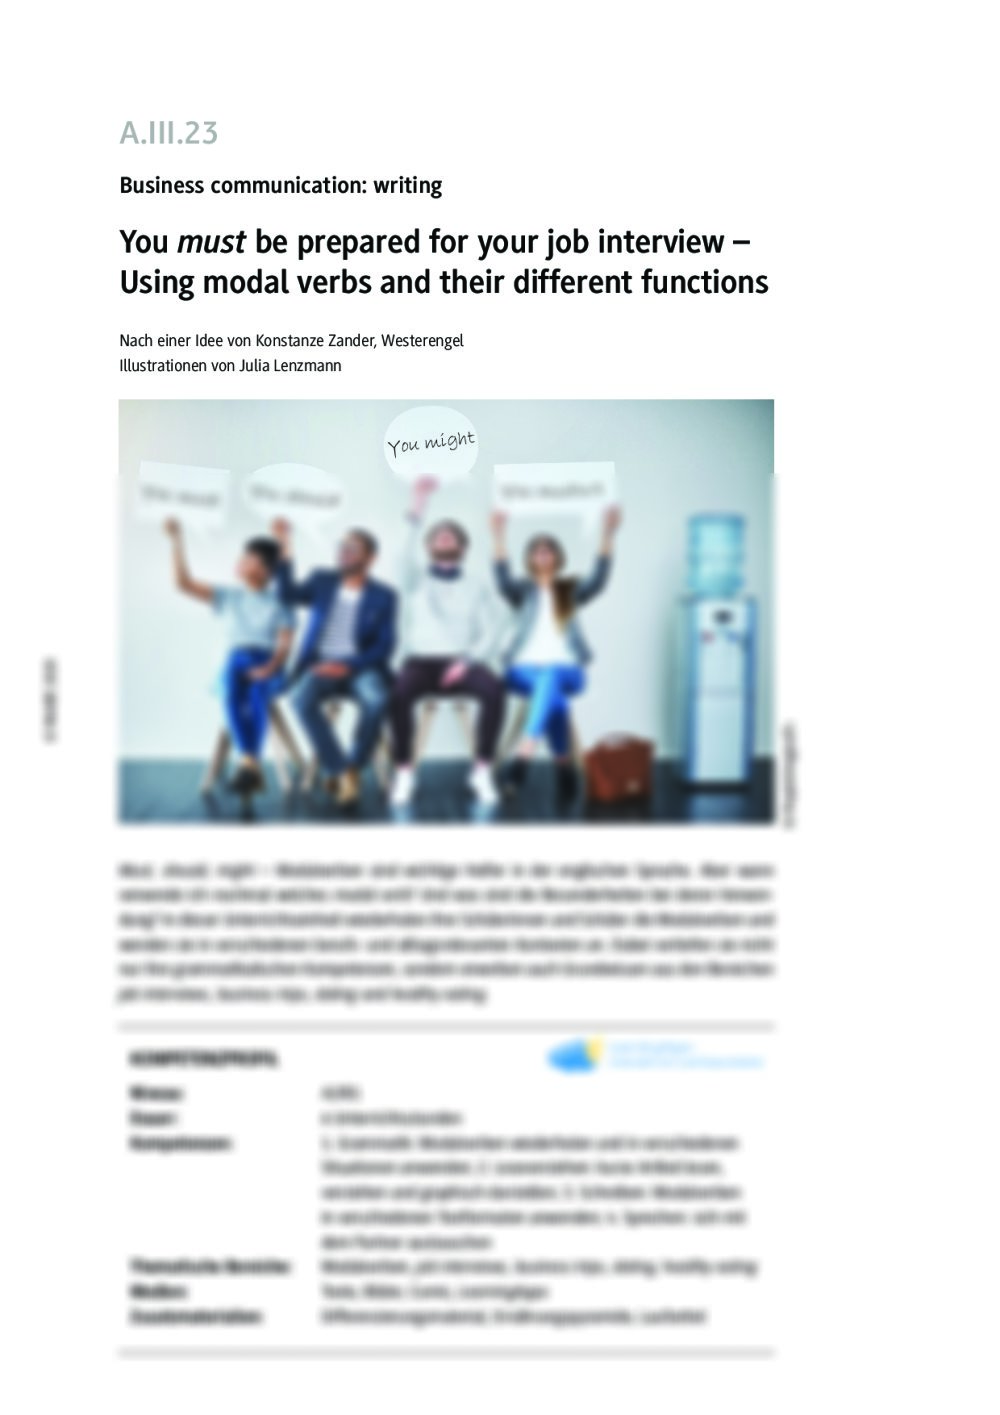 You must be prepared for your job interview - Seite 1